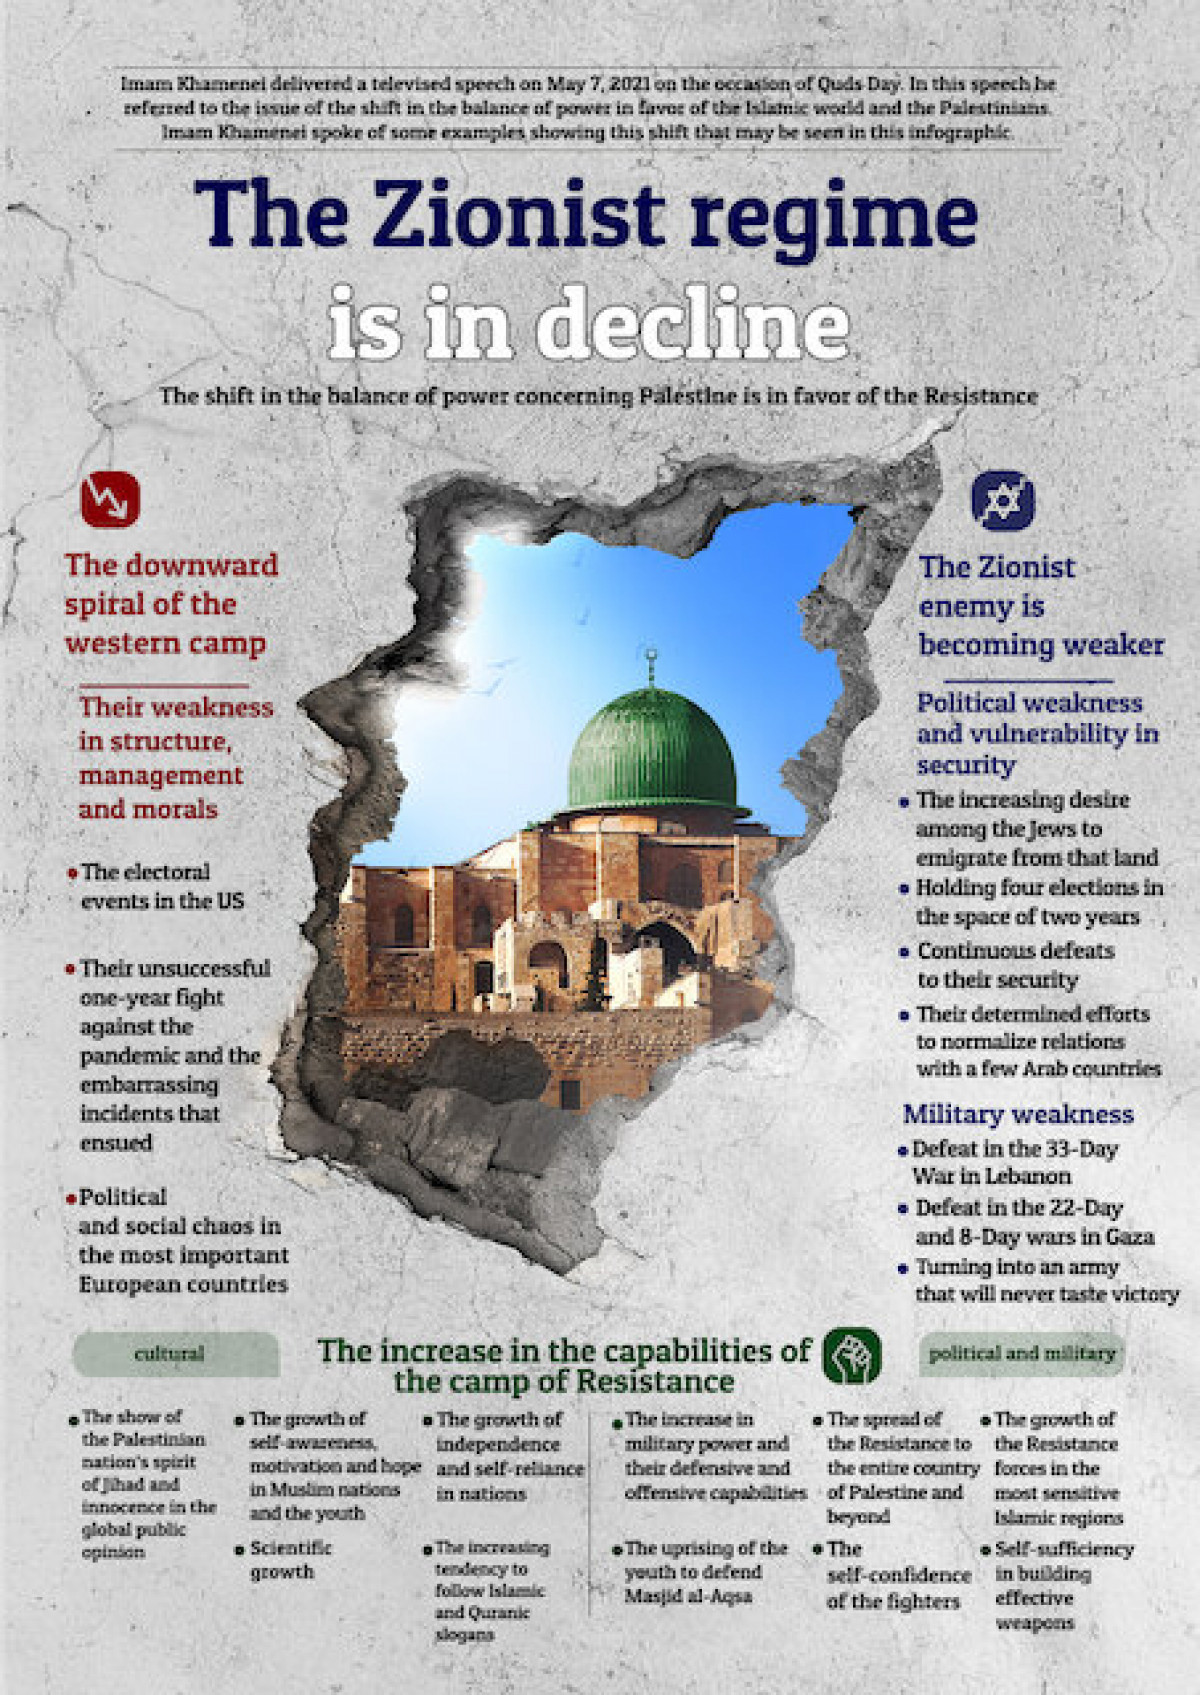 The Zionist regime is in decline